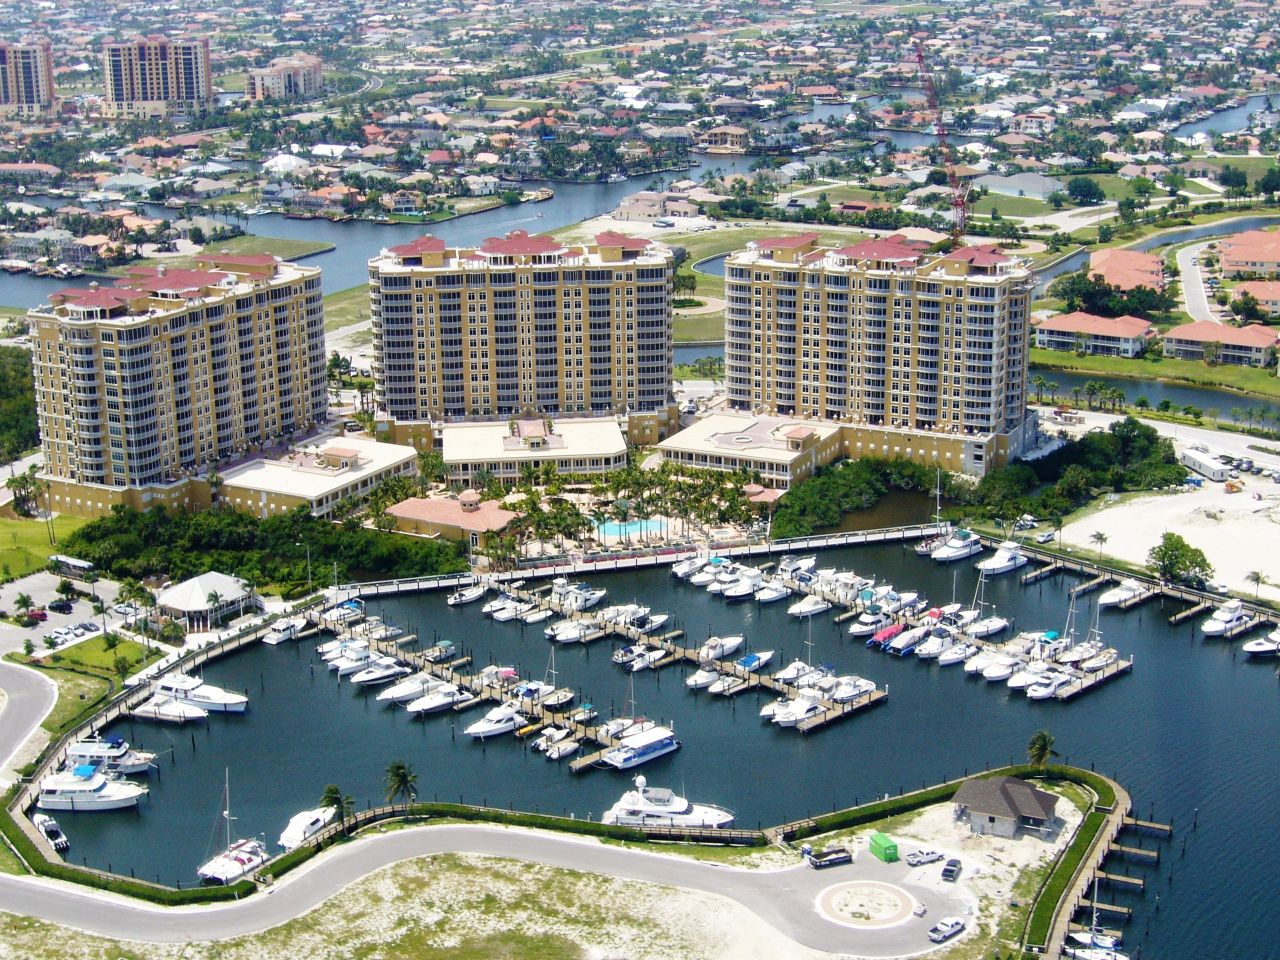 2. Cape Coral/Fort Myers, Florida